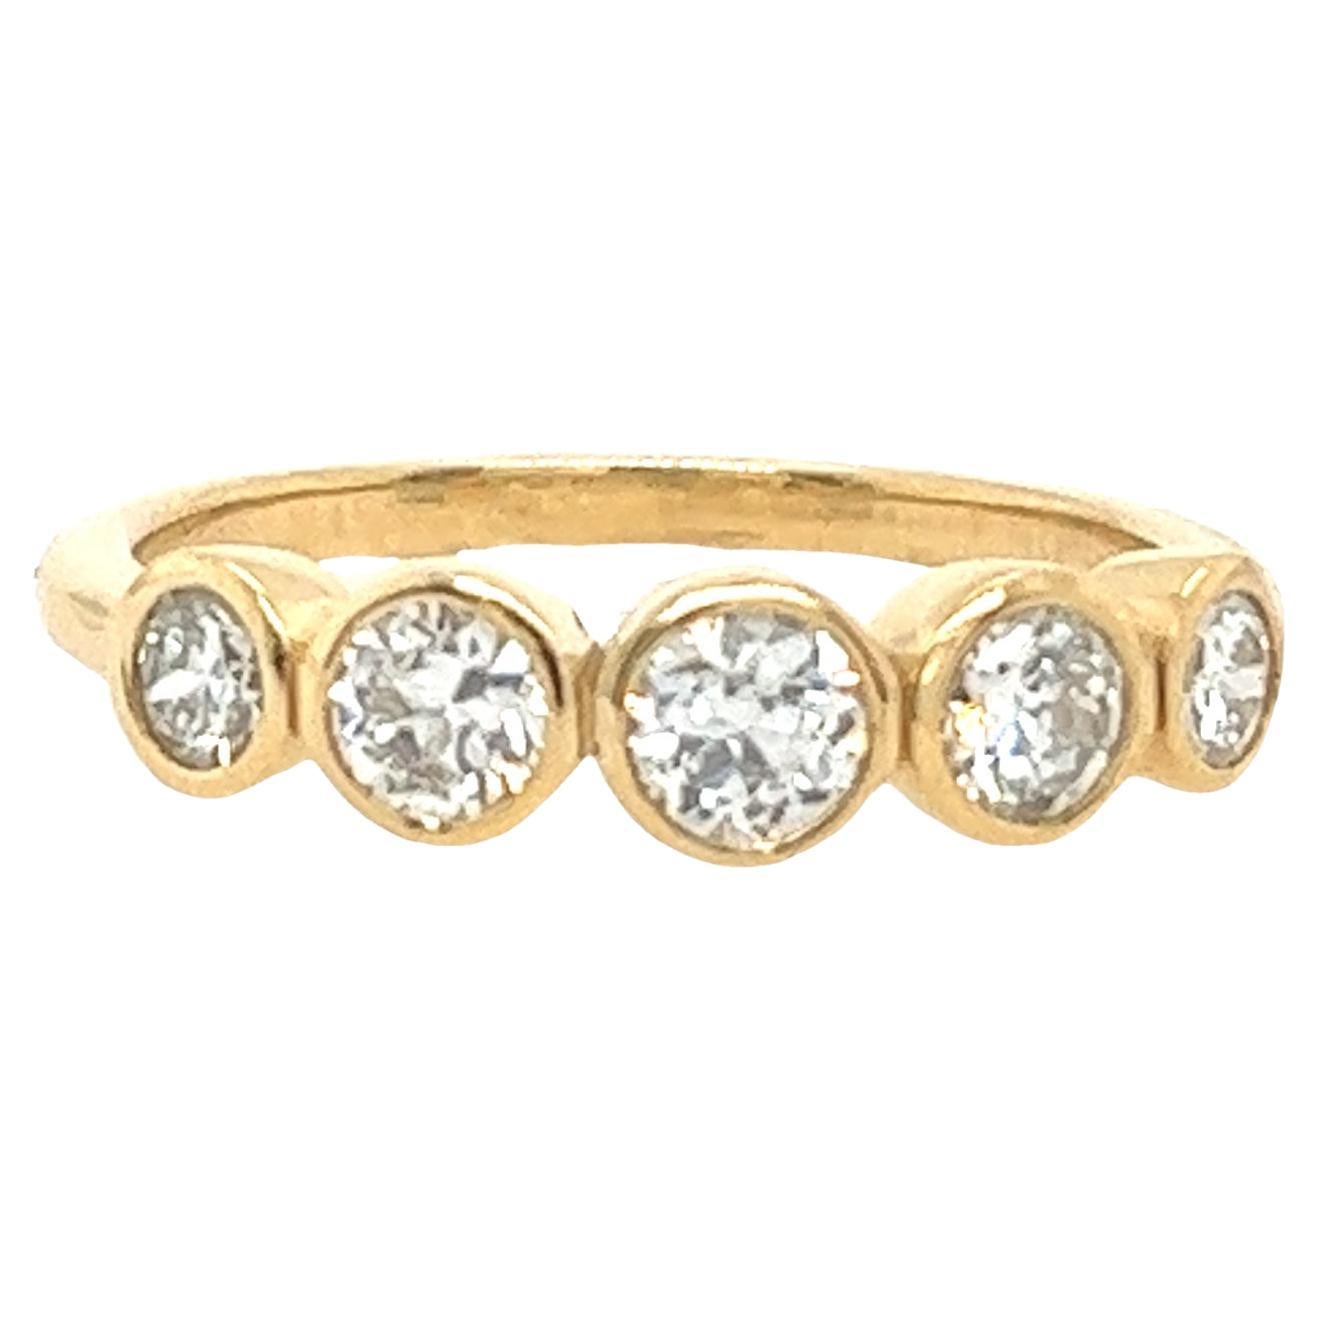 5-Stone Diamond Ring Set With 0.70ct H/SI1 Round Brilliant Diamonds In 18ct Gold For Sale